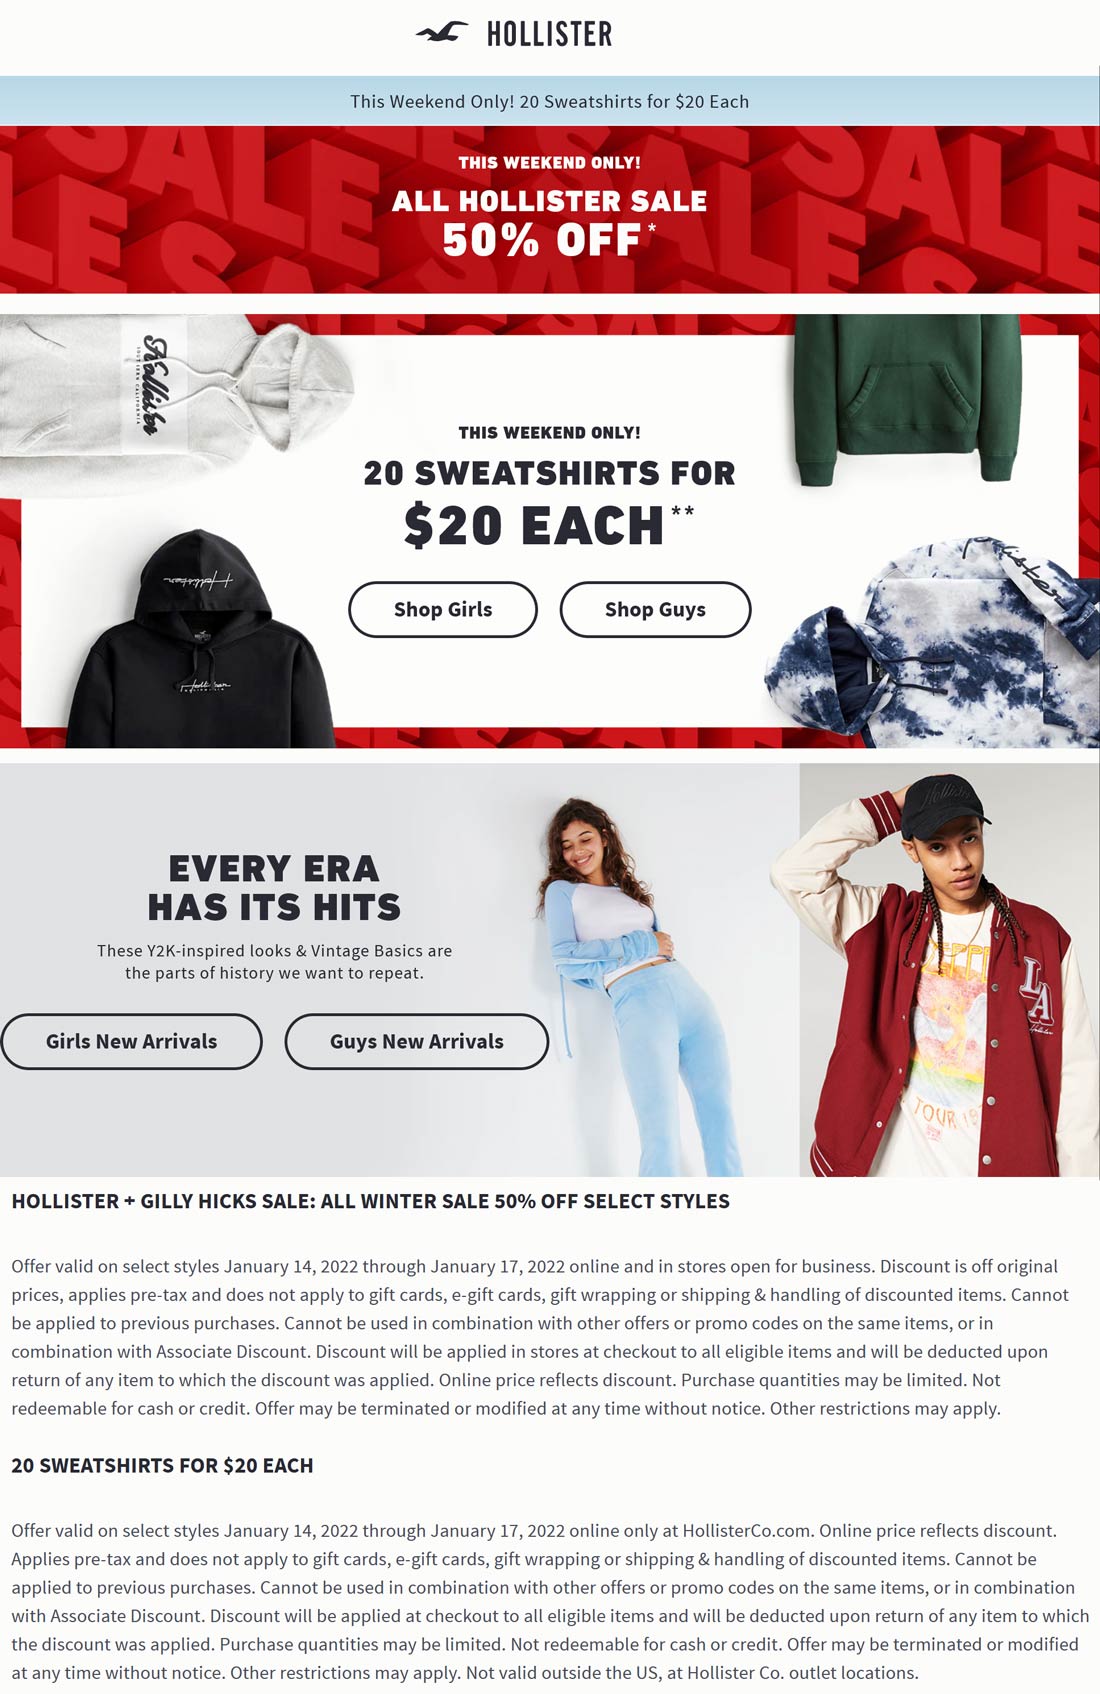 Hollister stores Coupon  50% off all winter sale items at Hollister, ditto online #hollister 